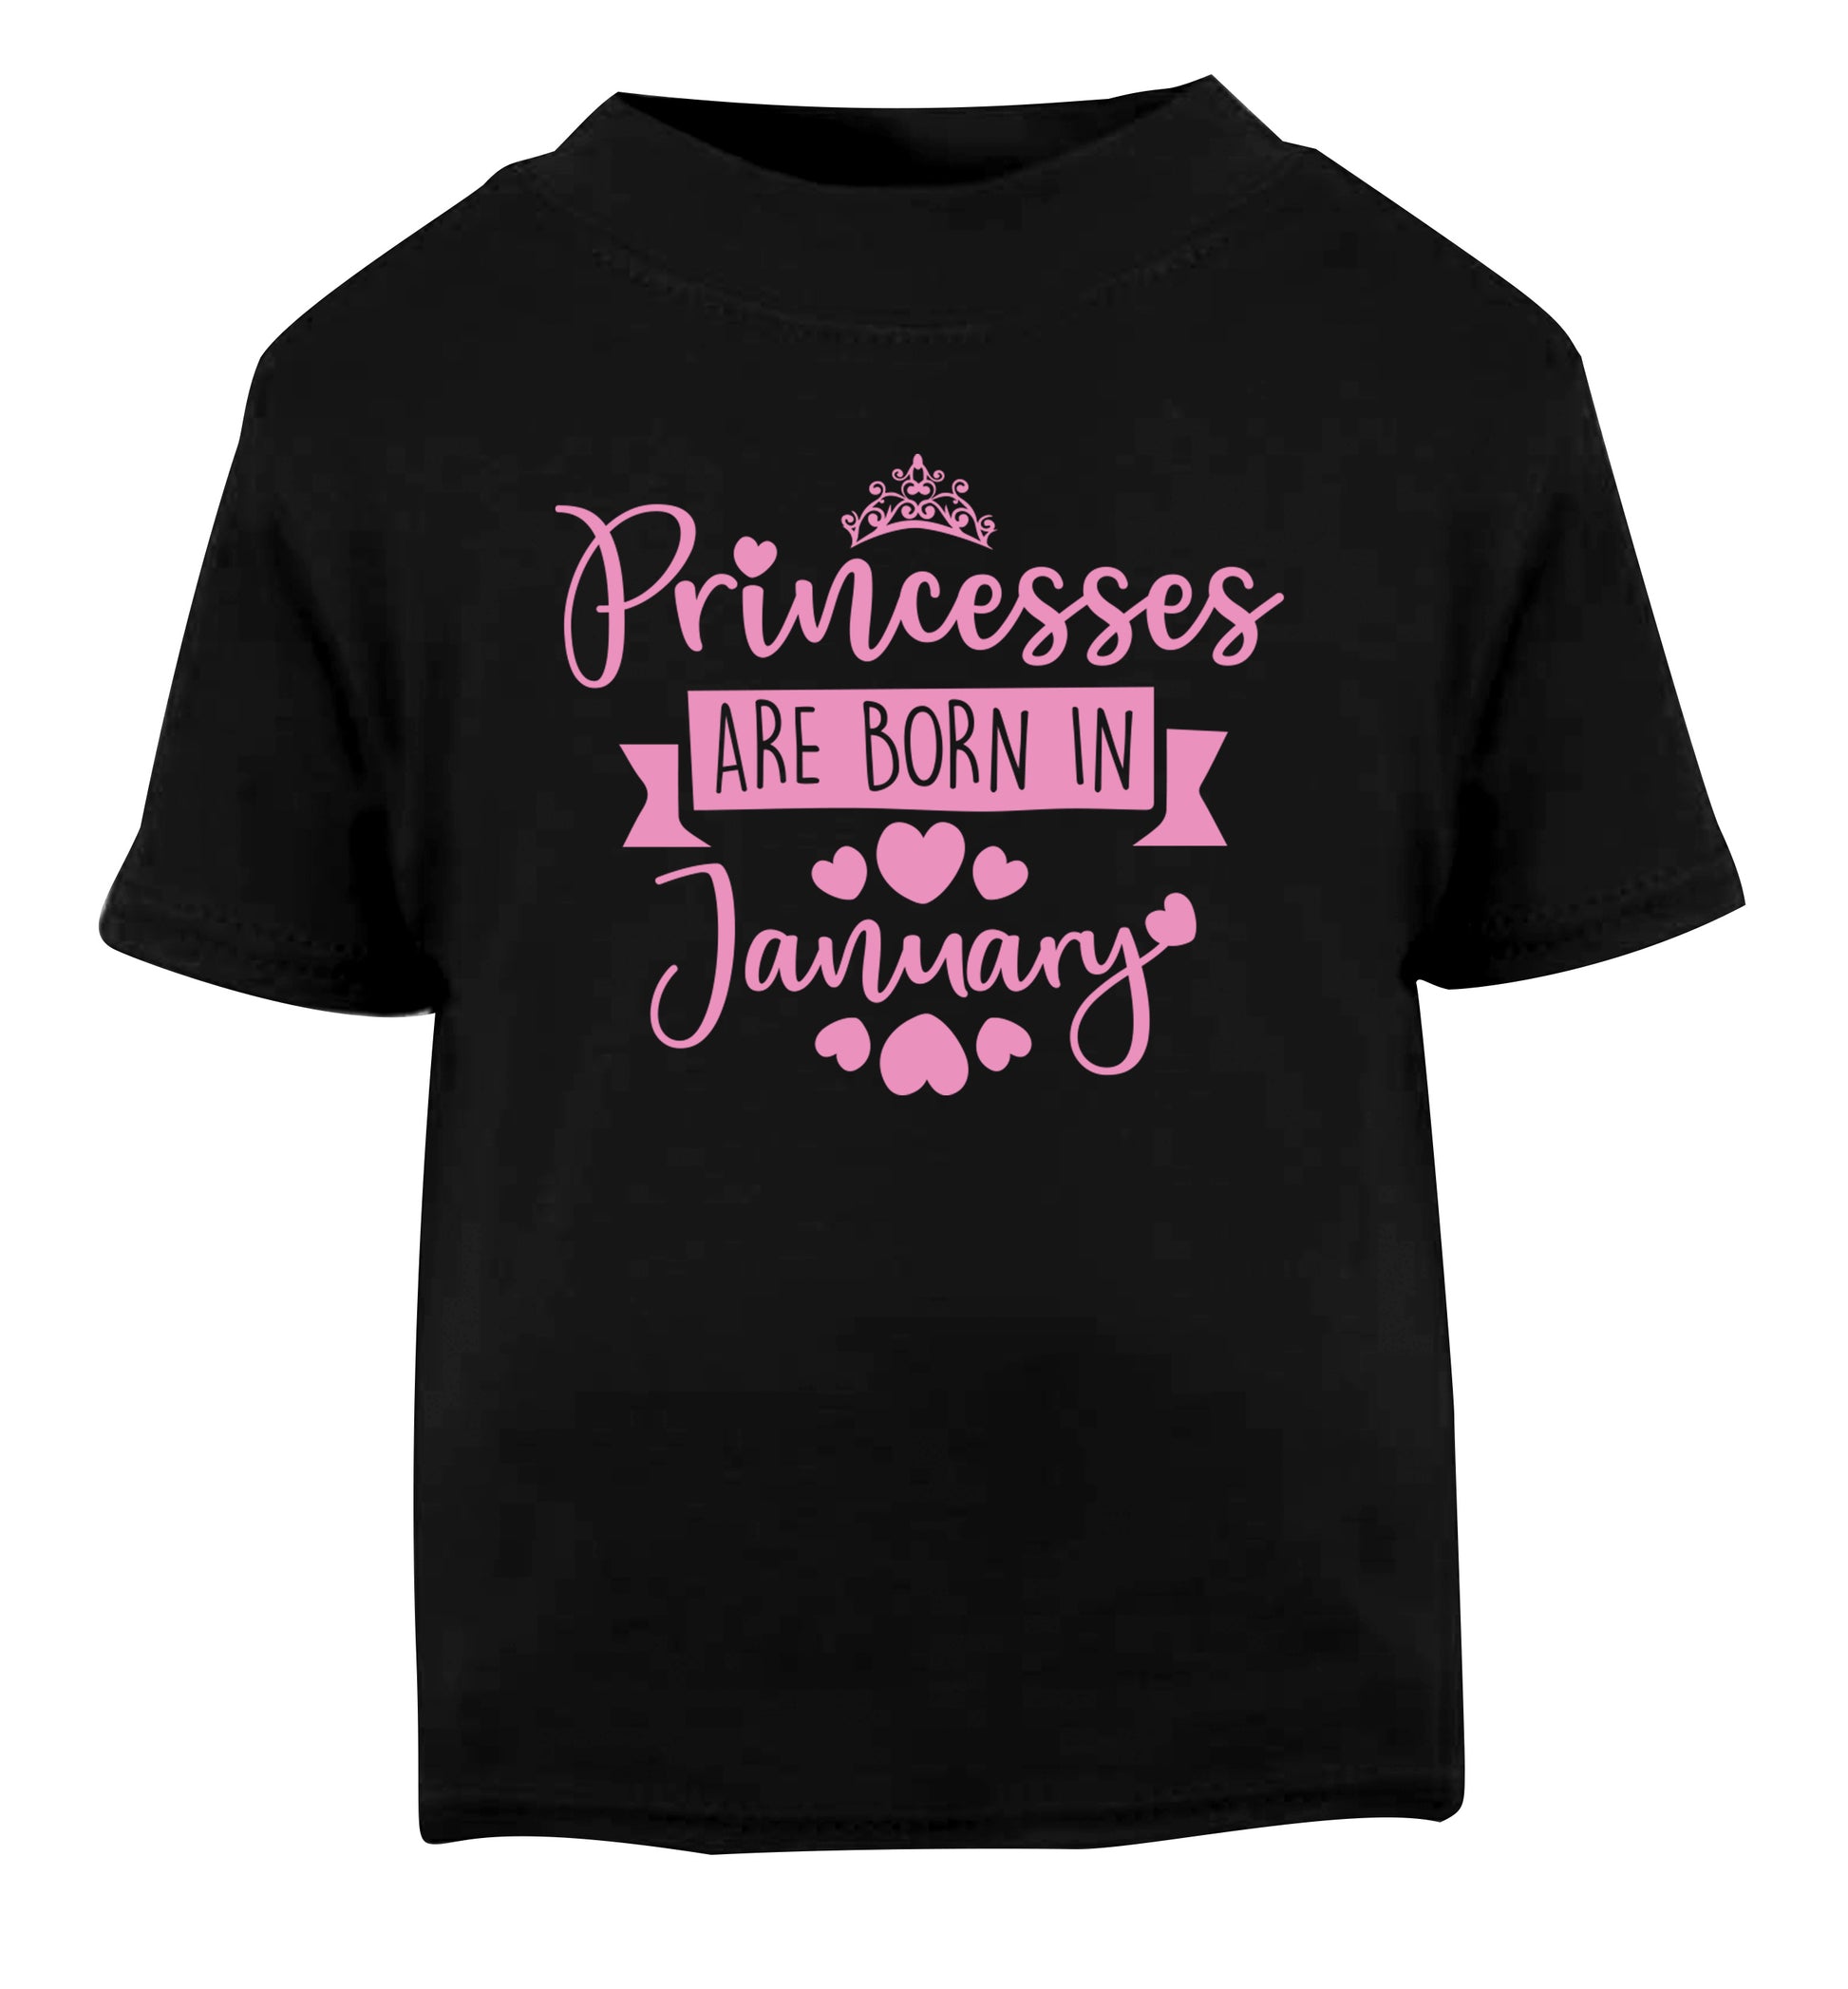 Princesses are born in January Black Baby Toddler Tshirt 2 years